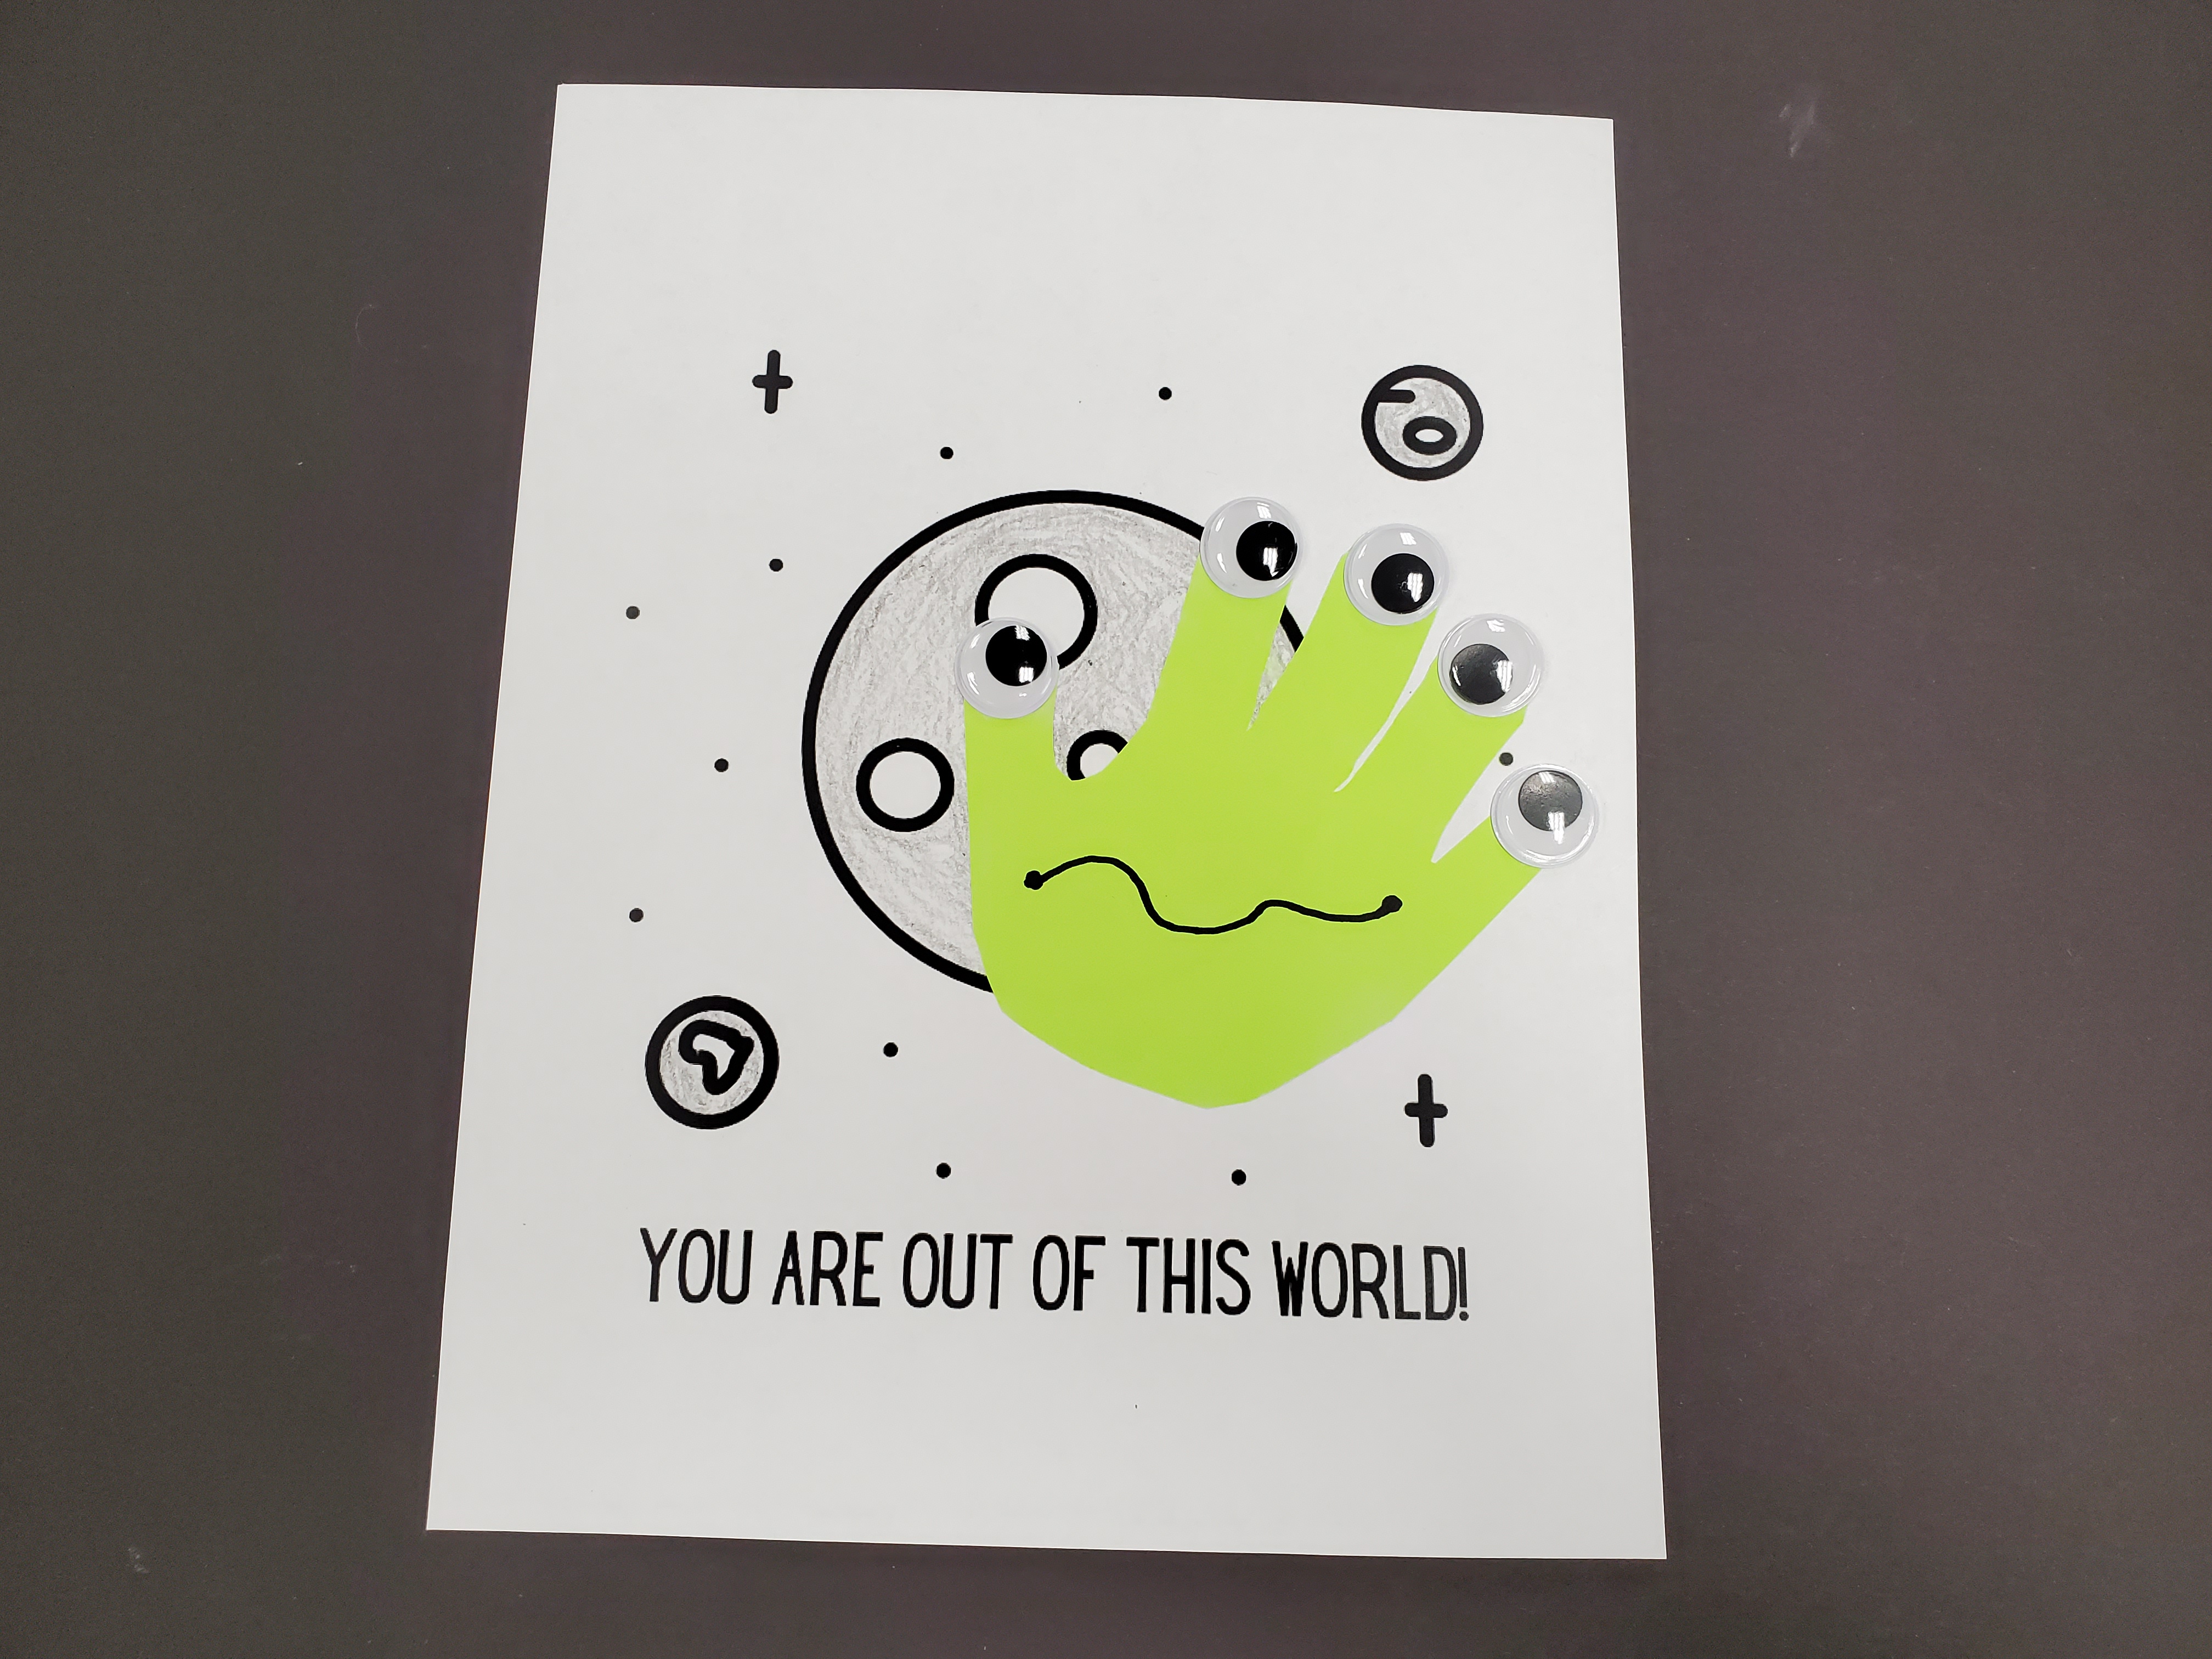 Image of a bright green handprint cutout glued to a white sheet of paper with an image of the moon. The white sheet of paper has the words "You are out of this world" printed on it. The green handprint cutout has five googly eyes, one at the tip of each finger, to give the appearance of an alien creature.